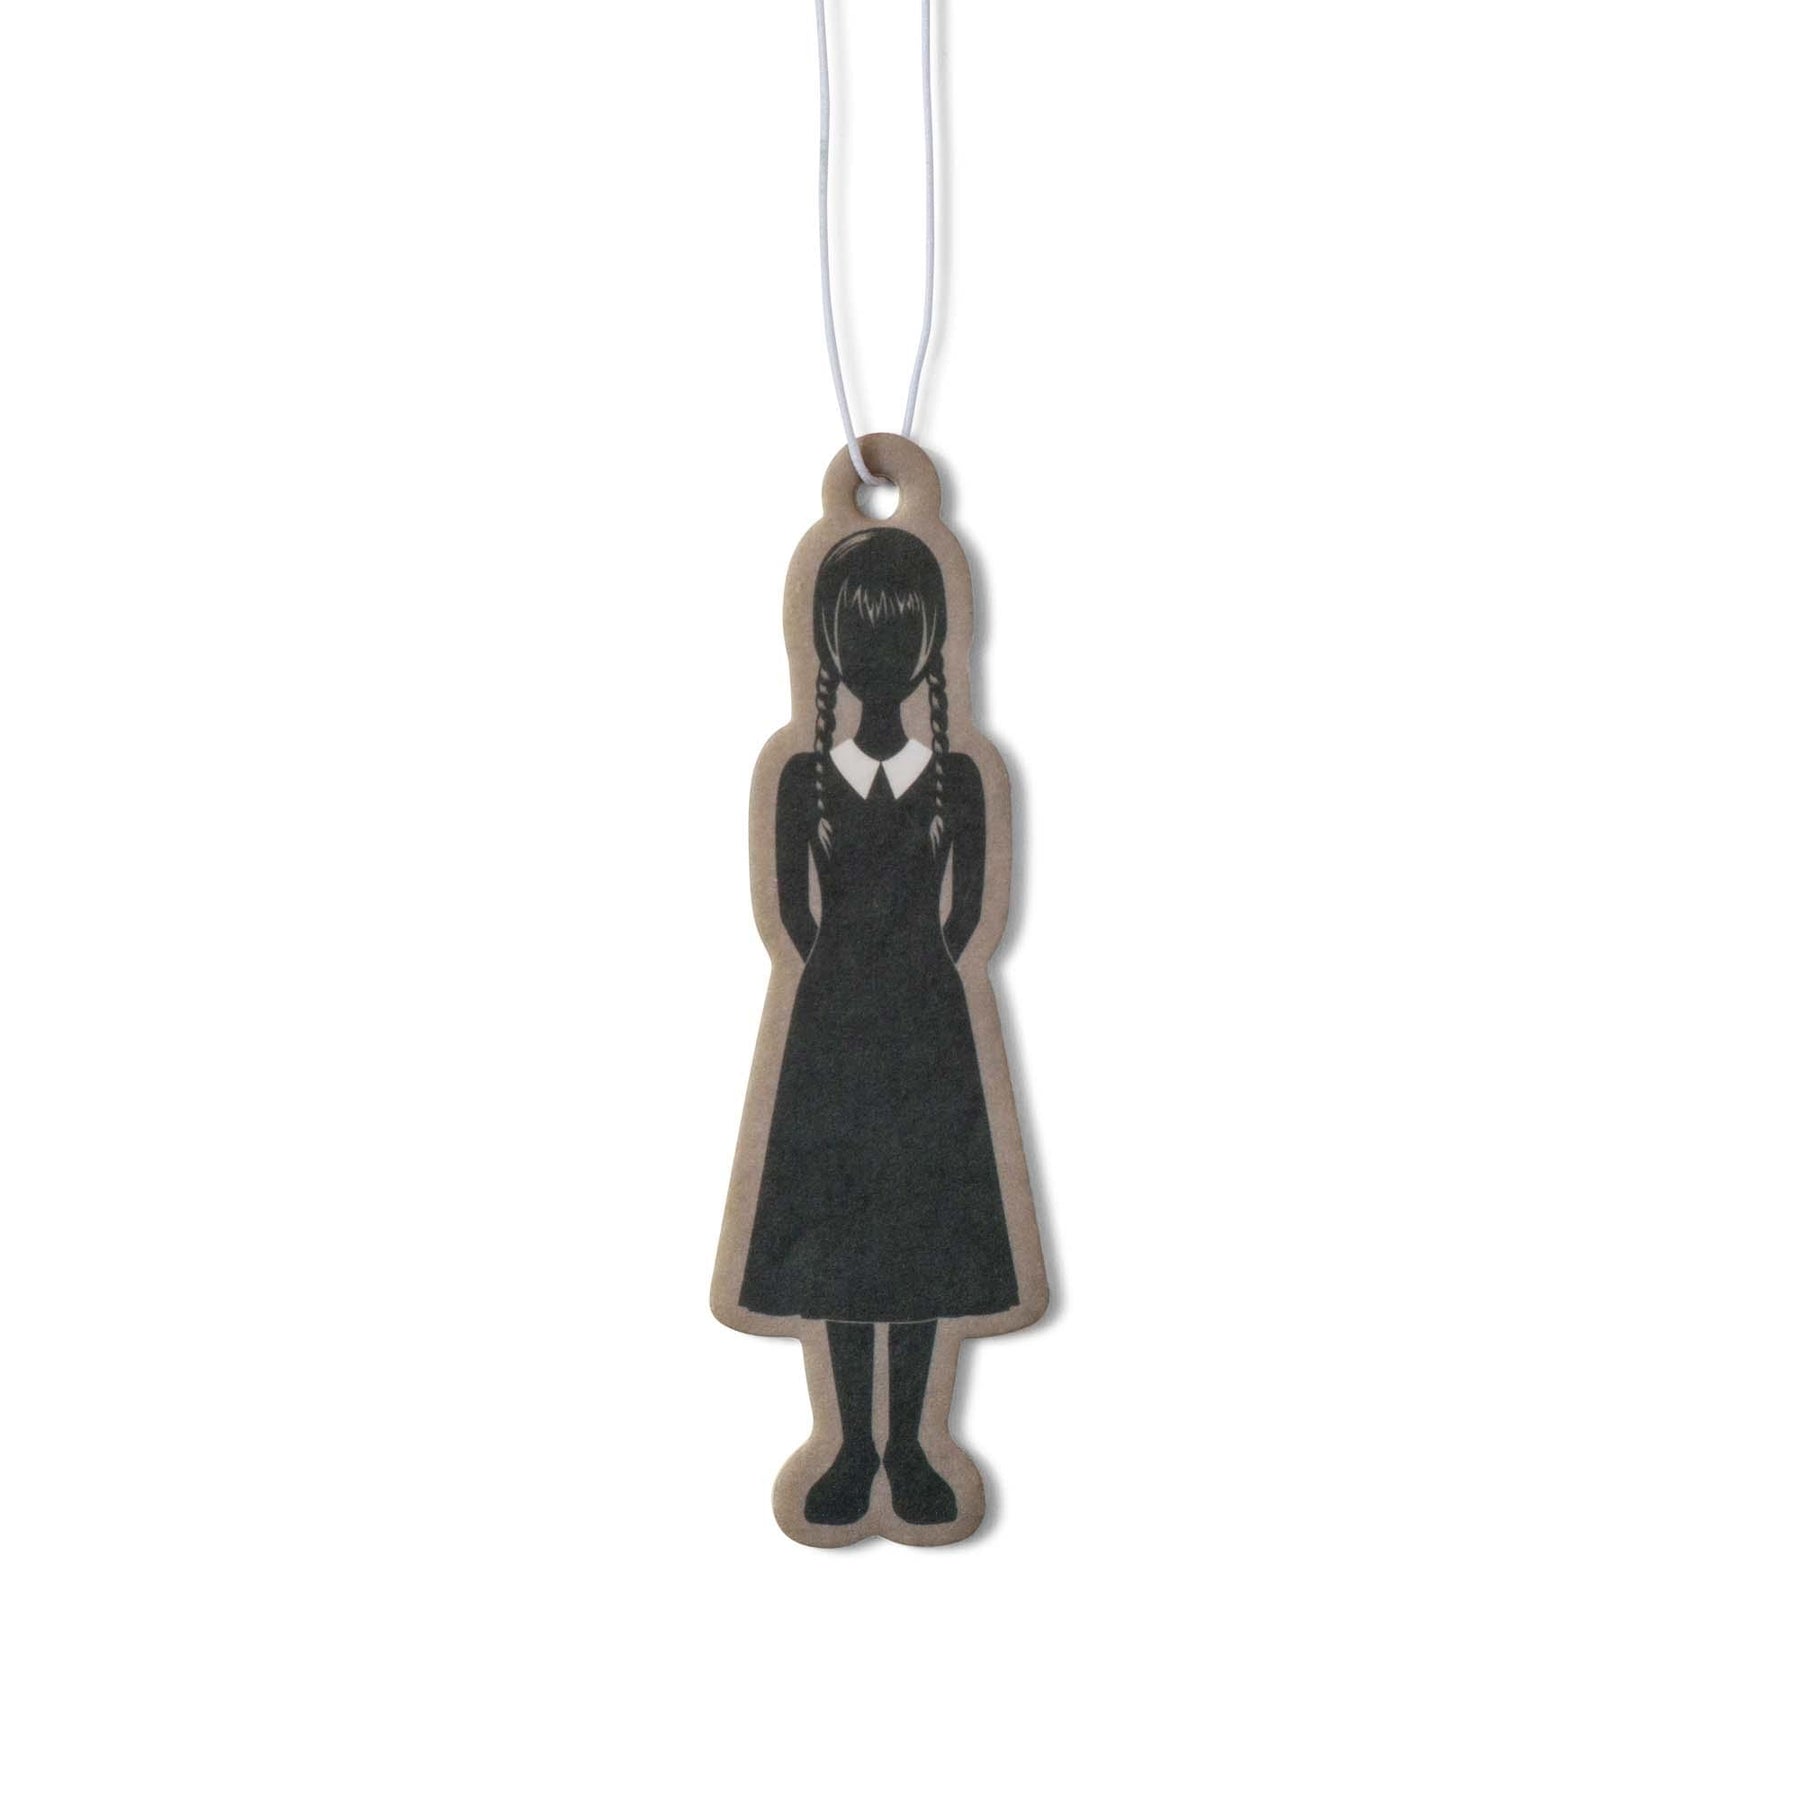 Addams Family Wednesday Silhouette Cherry-Scented Air Freshener